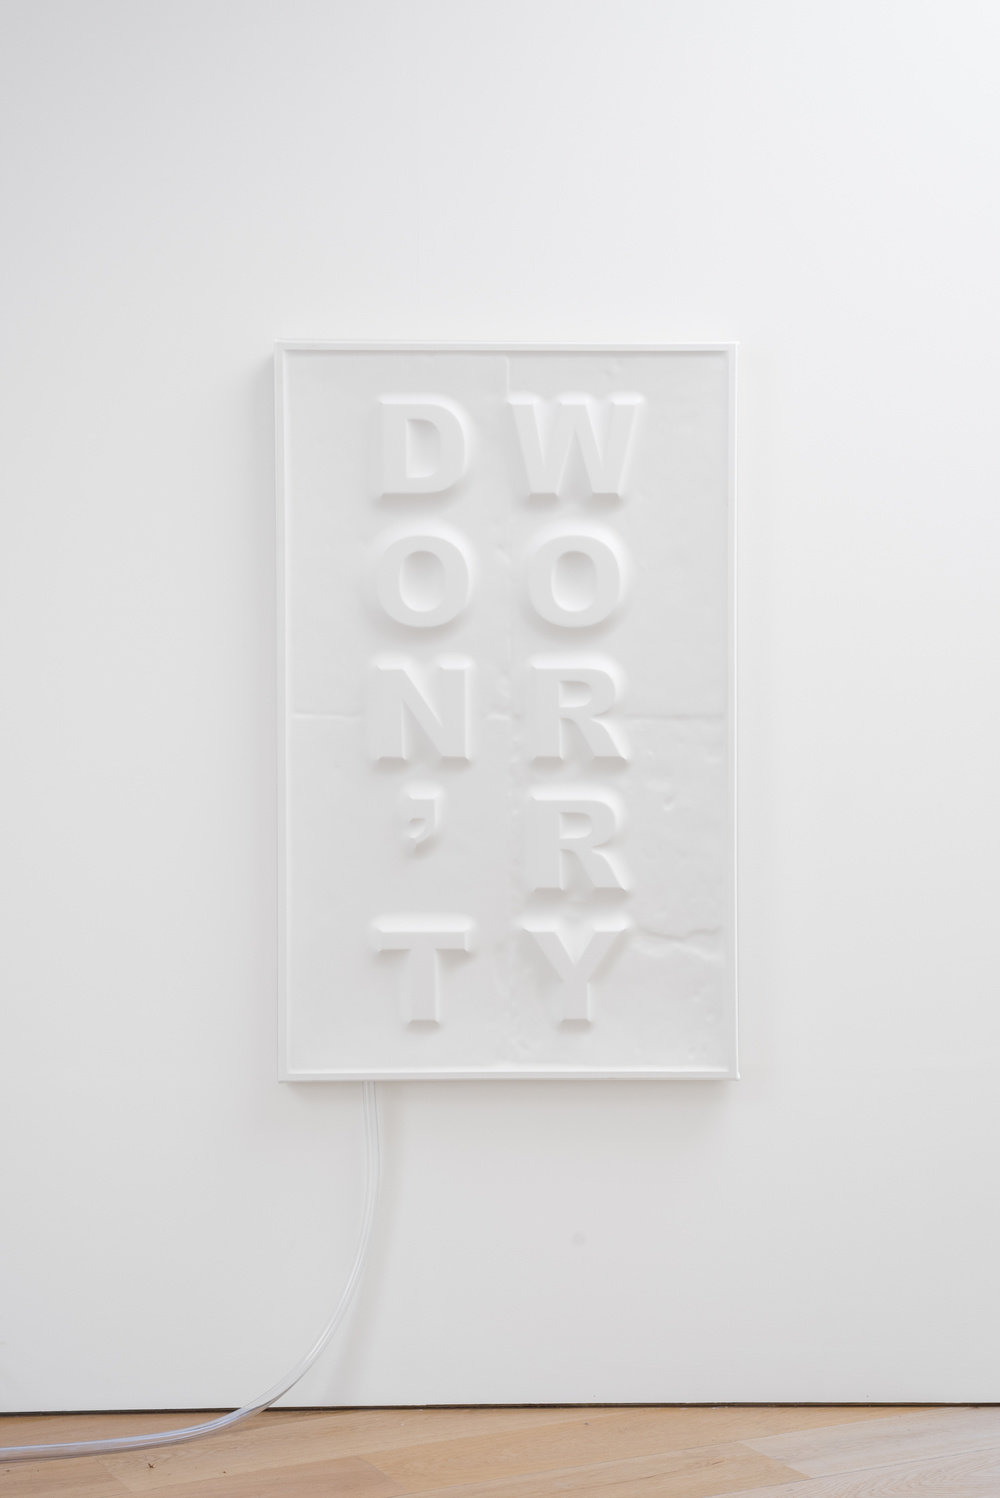 Dont worry wall by antoine catala marlborough